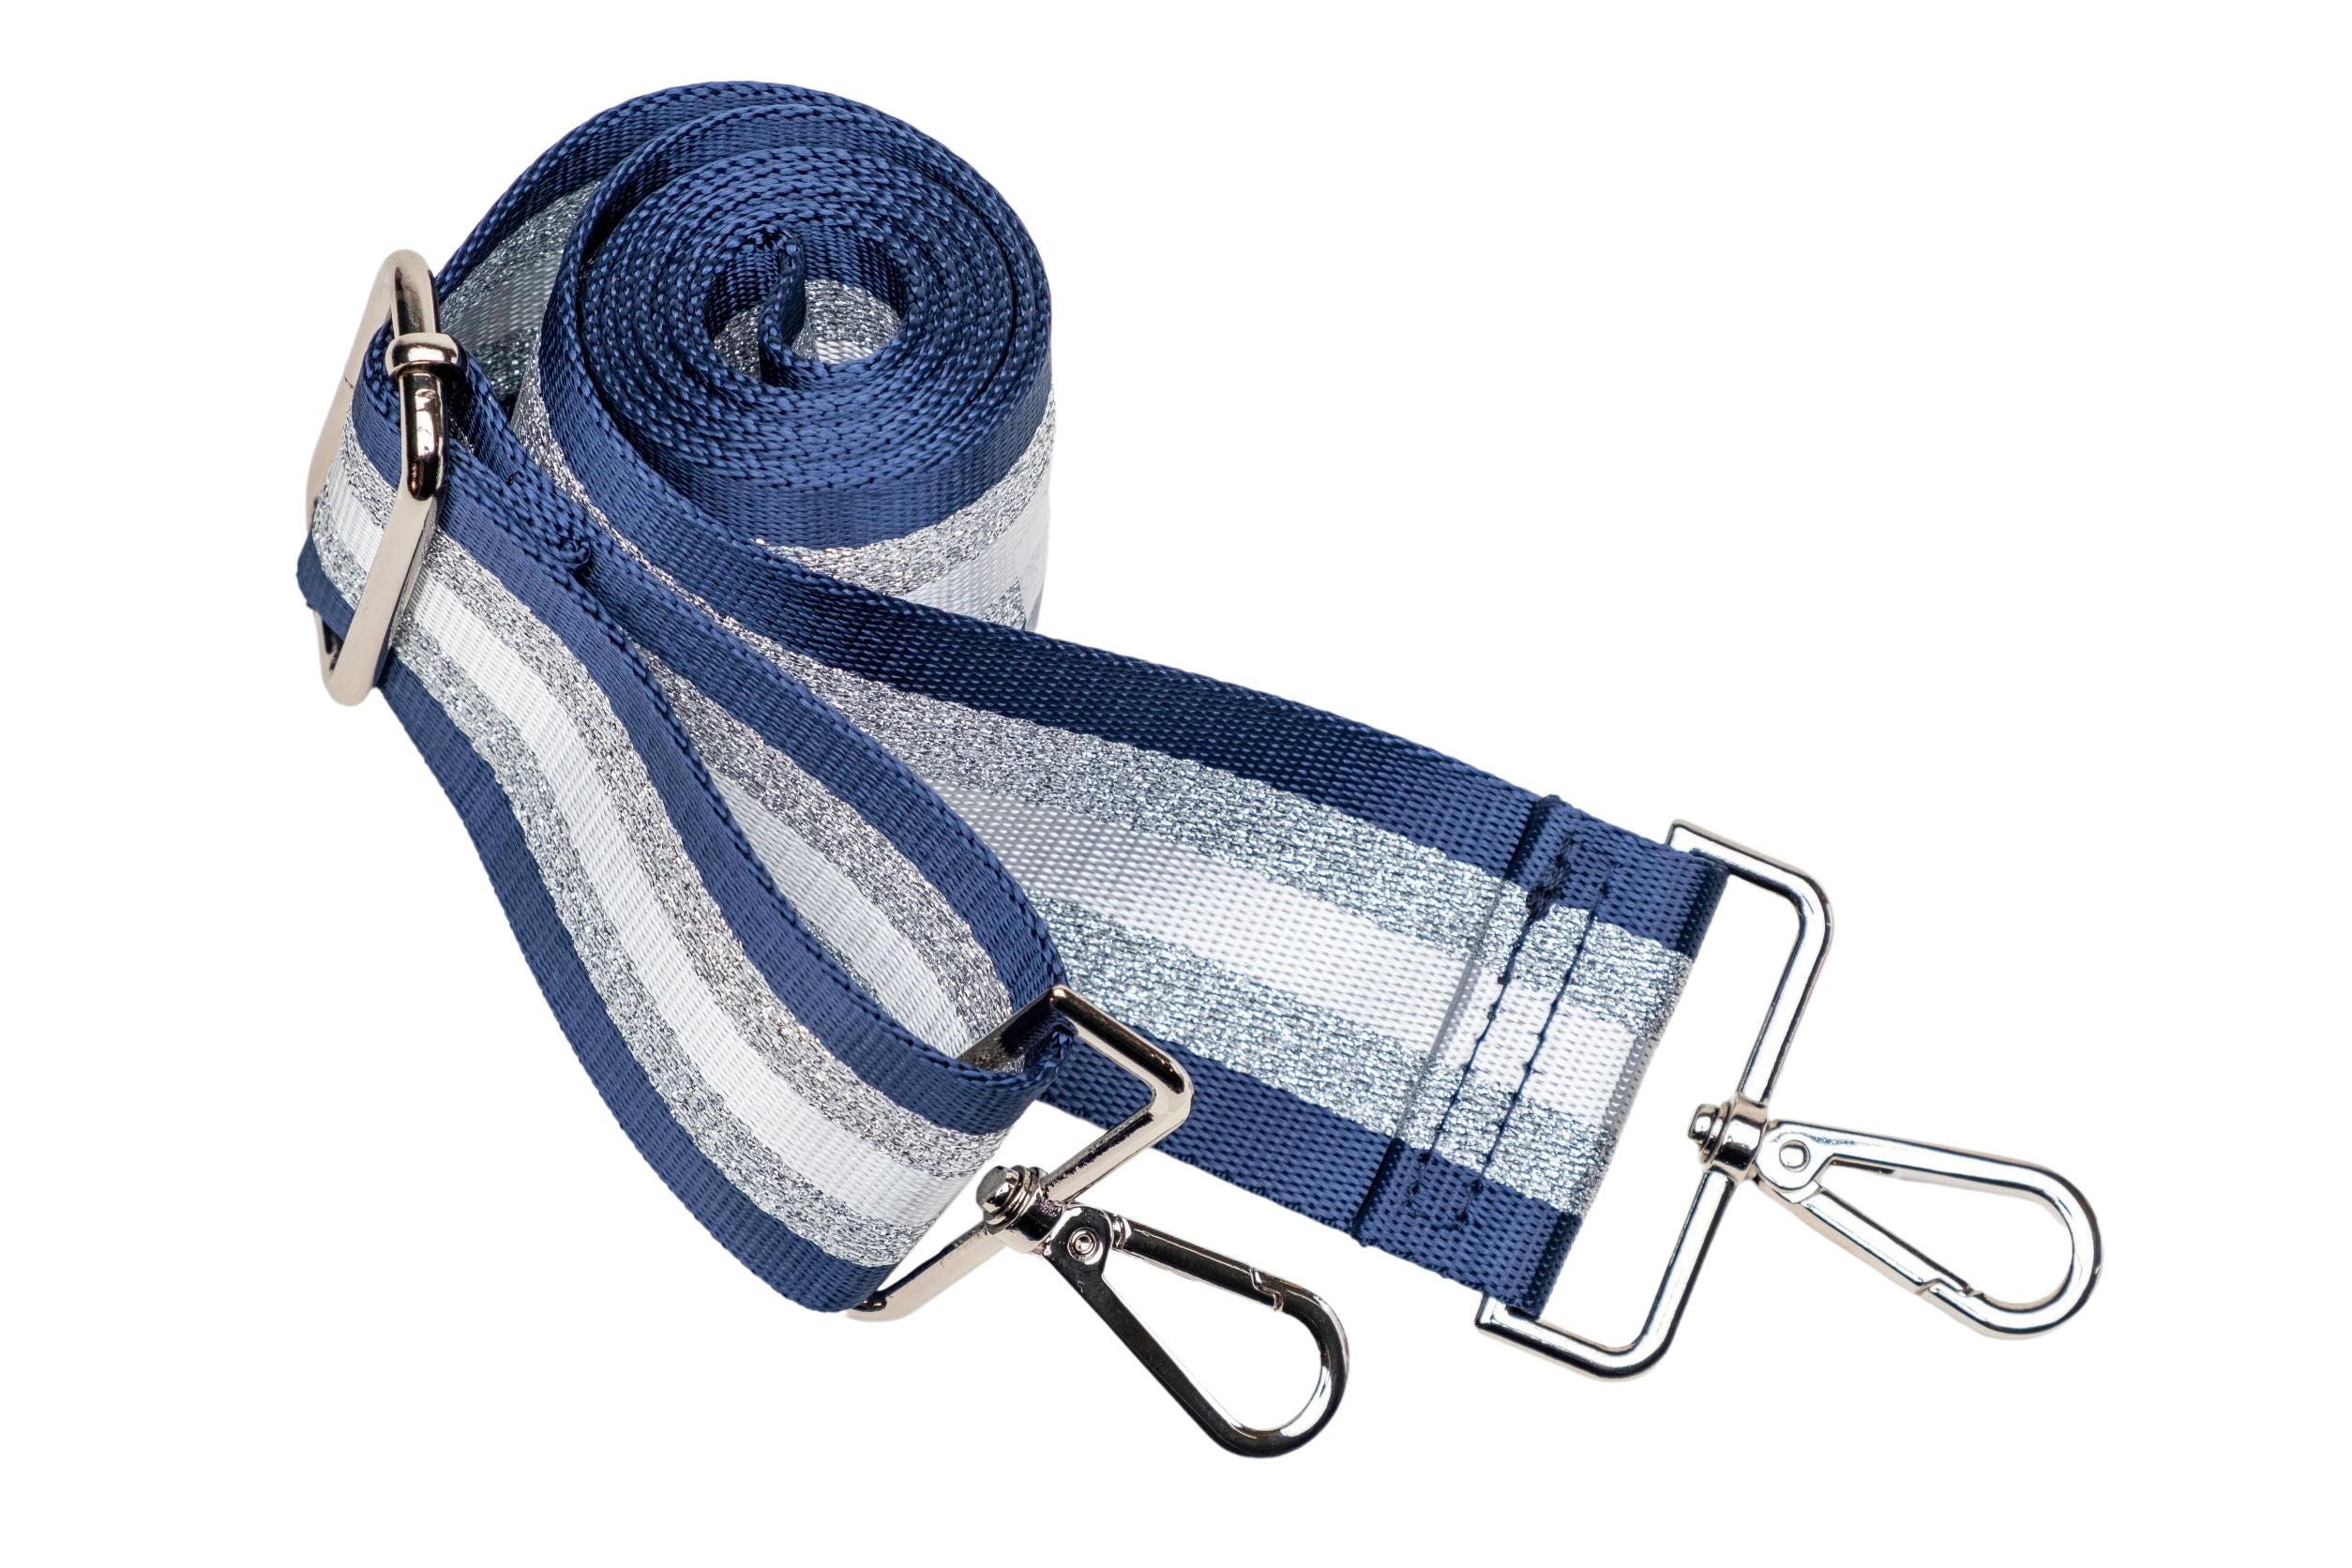 Wholesale Packs (4 or 10) - Navy Blue Shiny HydroBag with Navy/Silver/White Strap